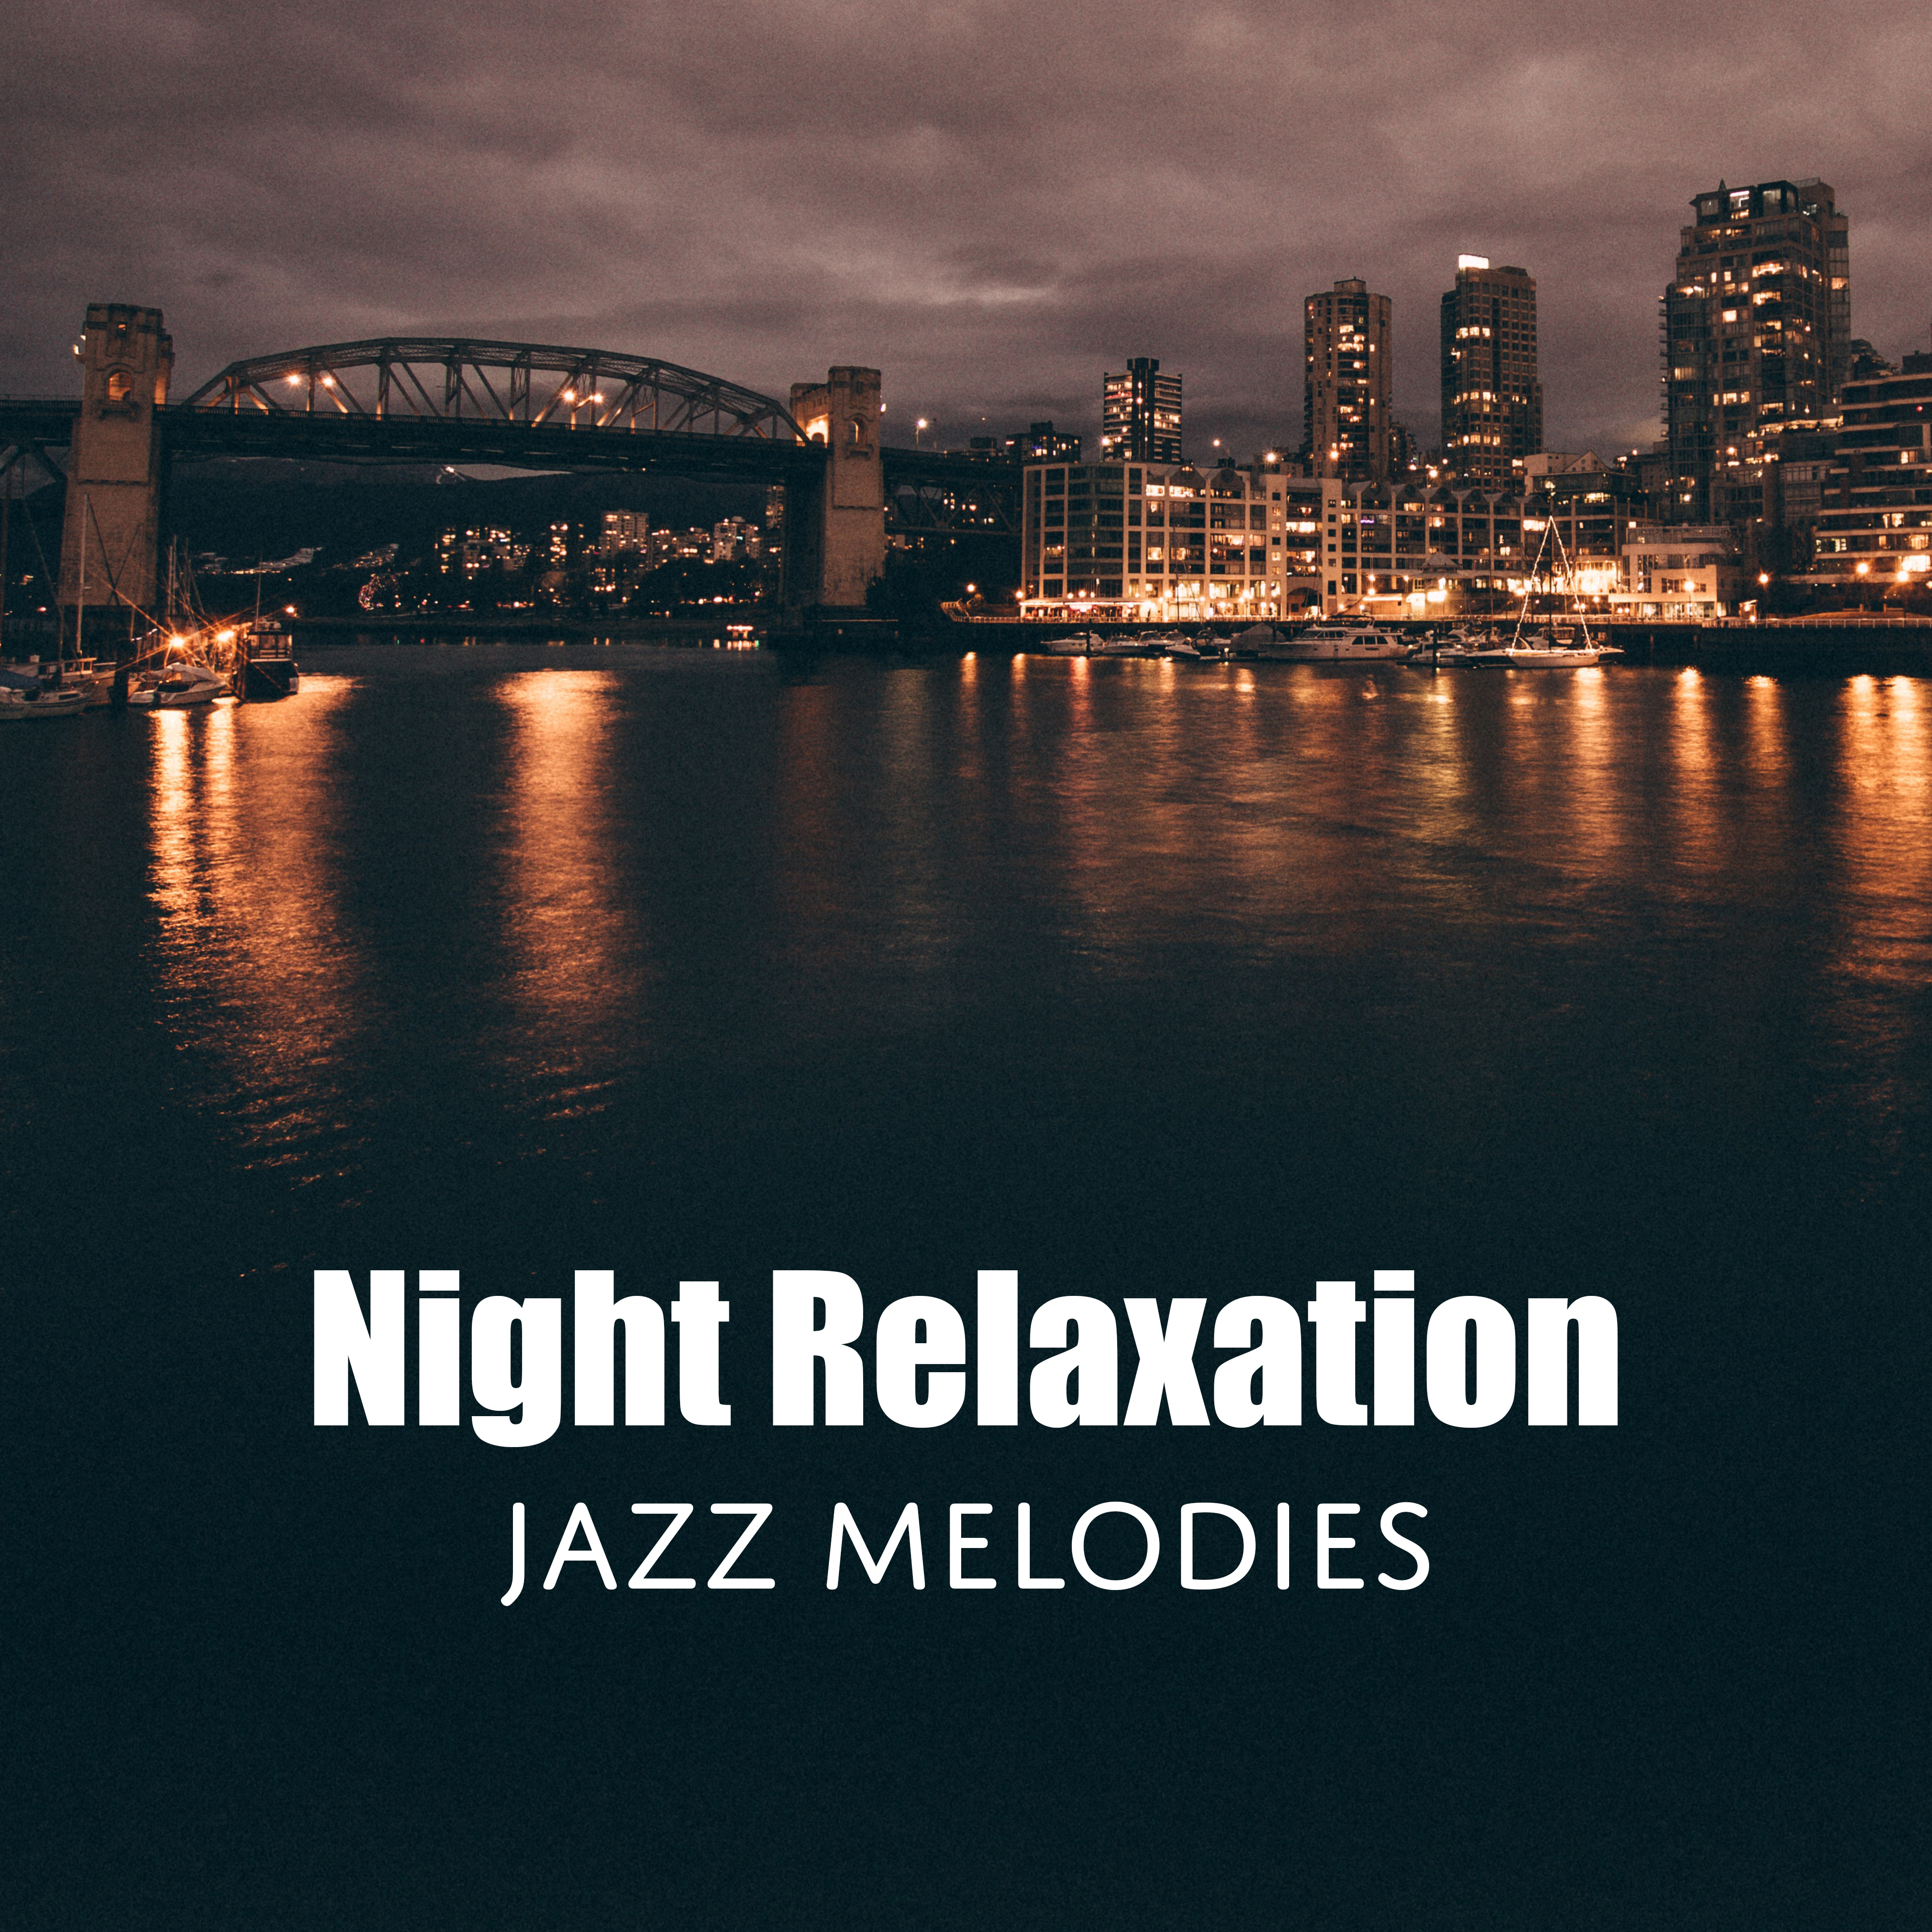 Night Relaxation Jazz Melodies